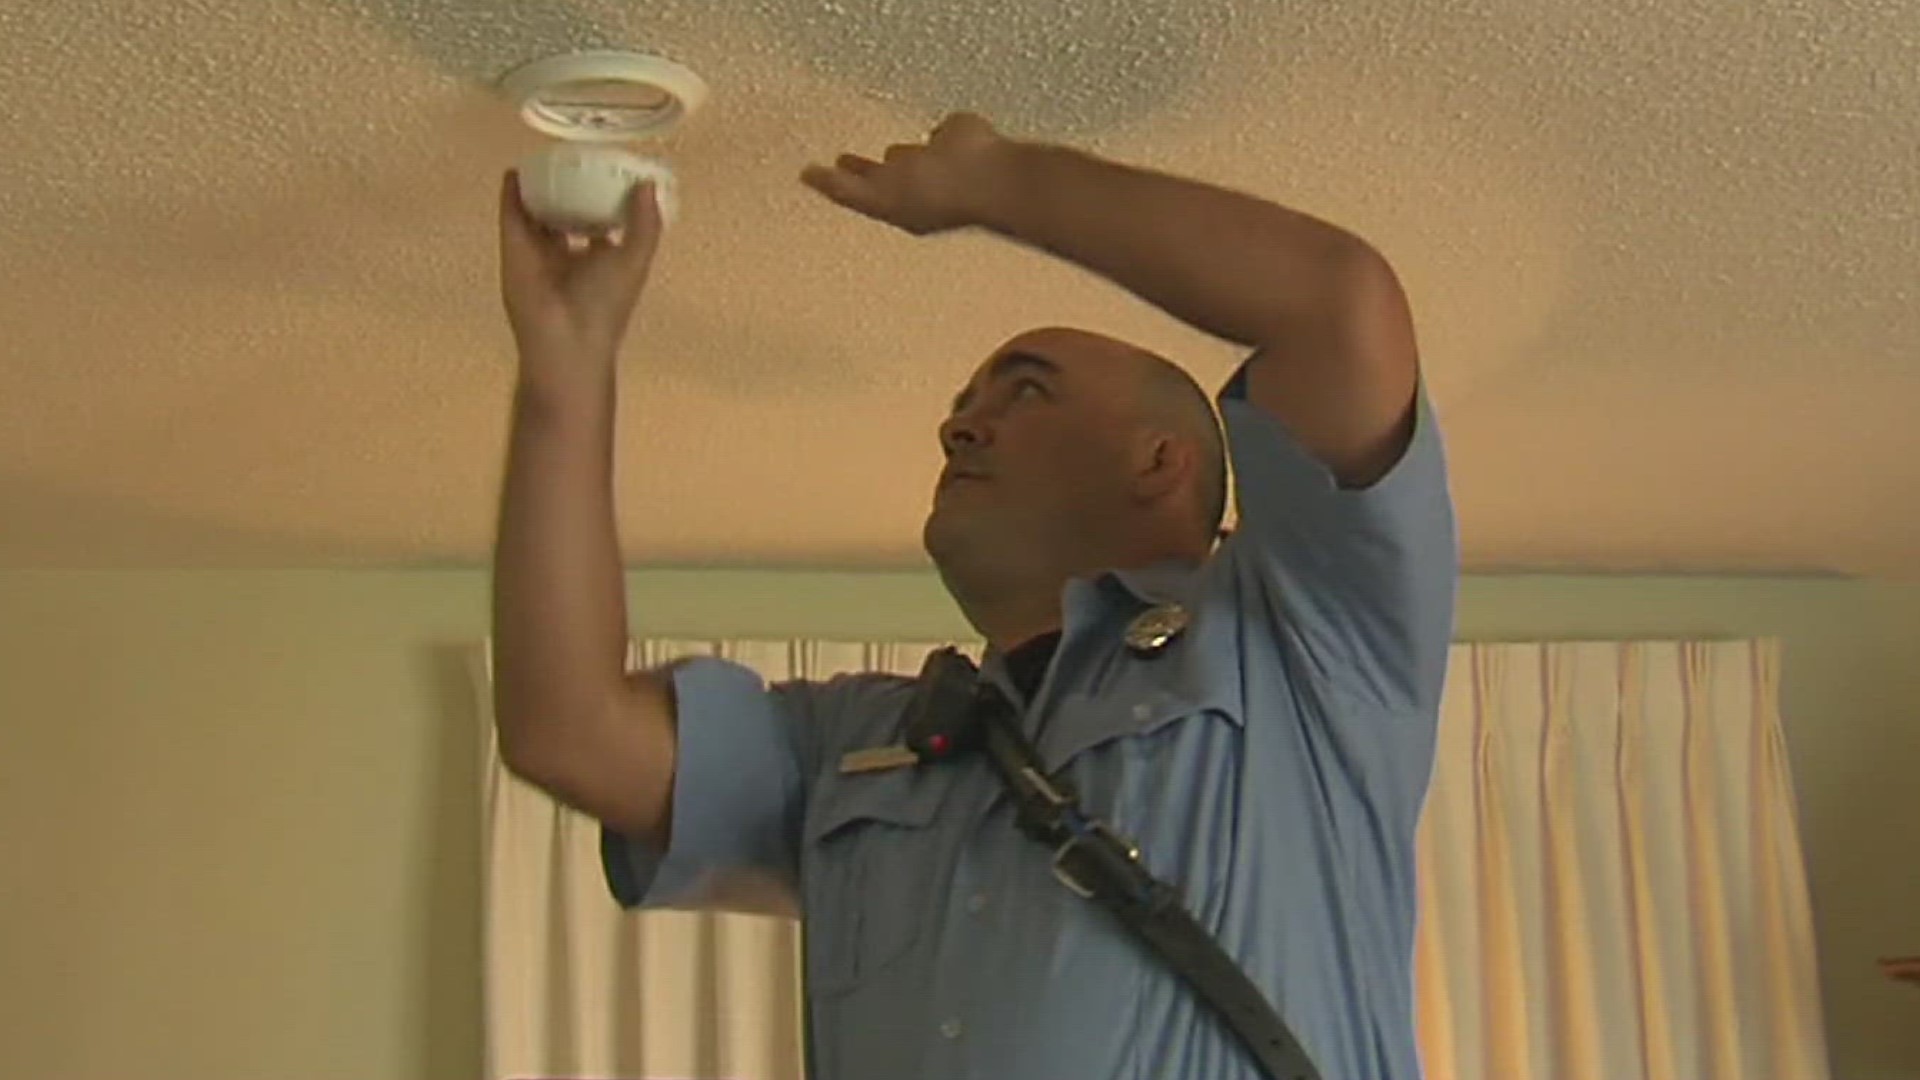 The goal is to install 200 smoke alarms! For more information visit this story on our website kiiitv.com